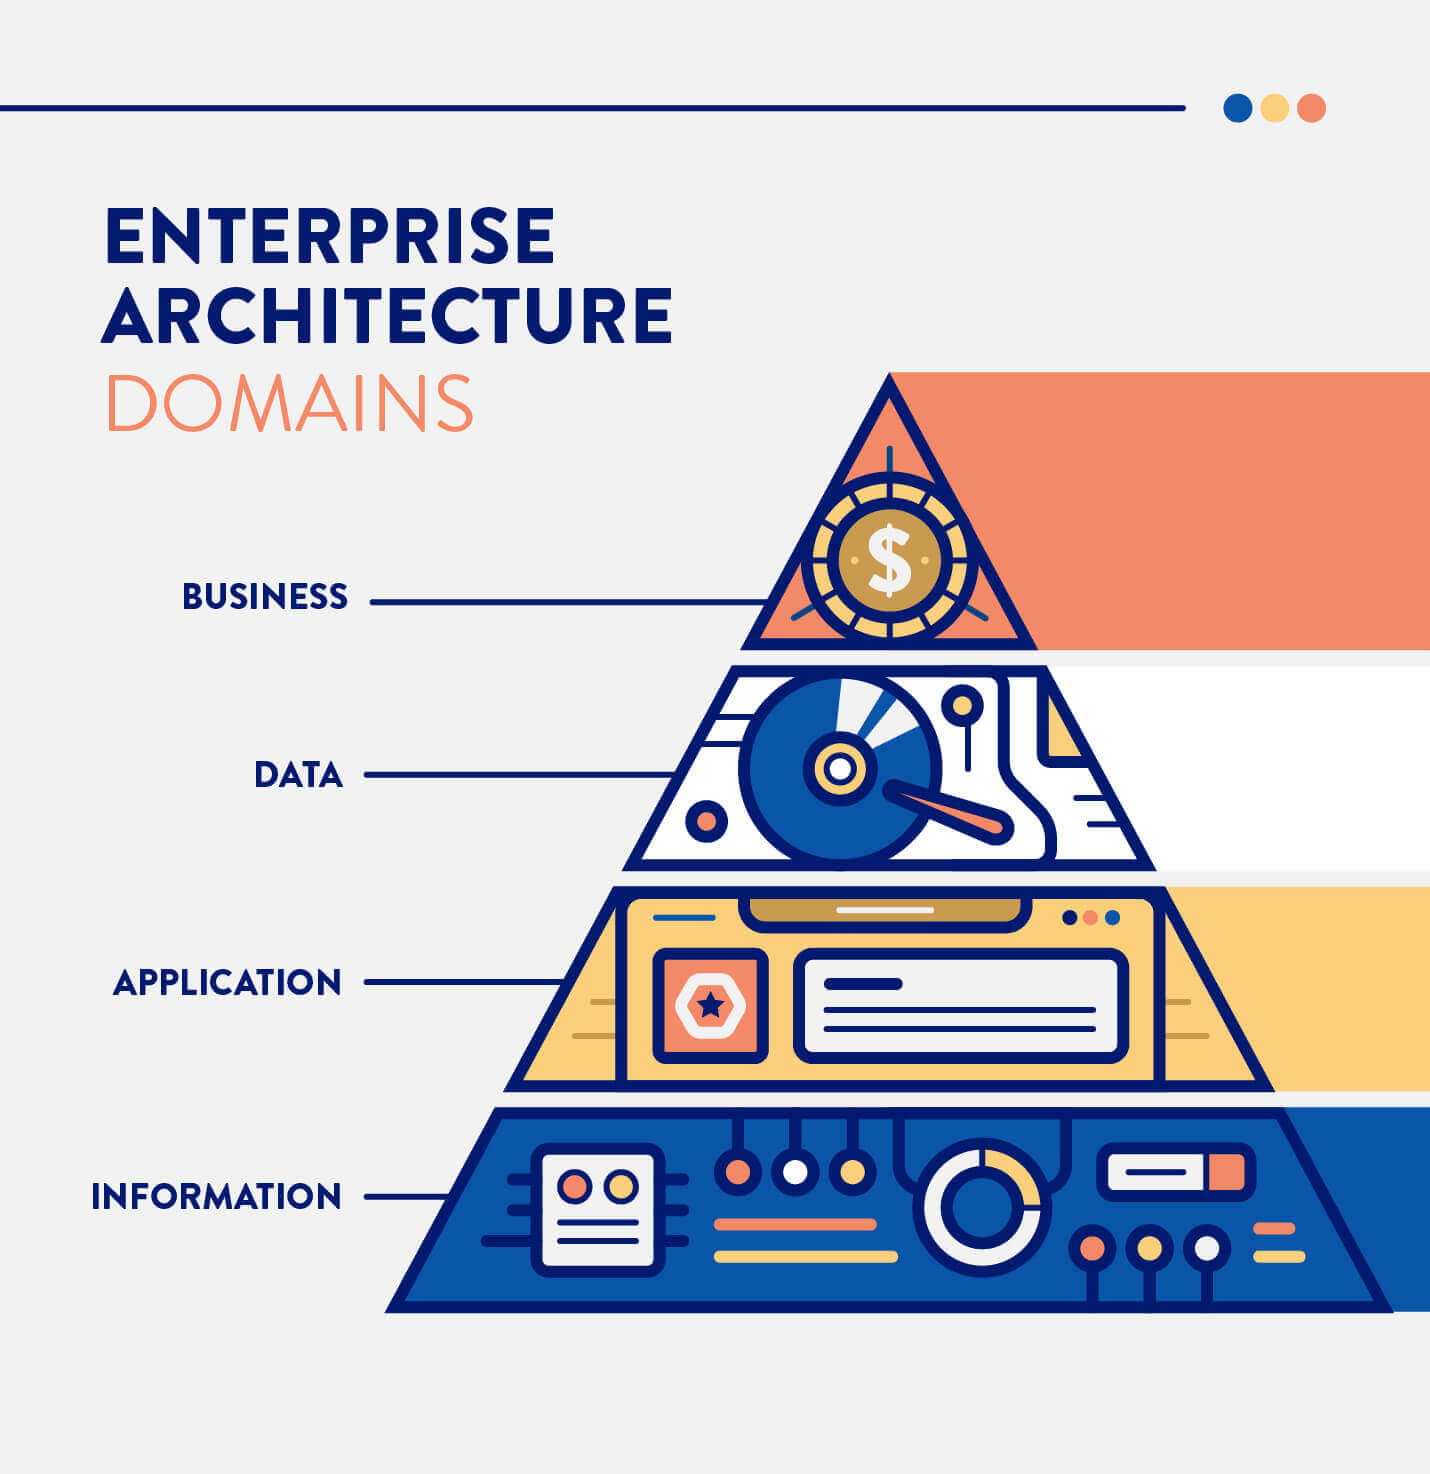 layers of the Business, data, application, and information domains for enterprise architecture